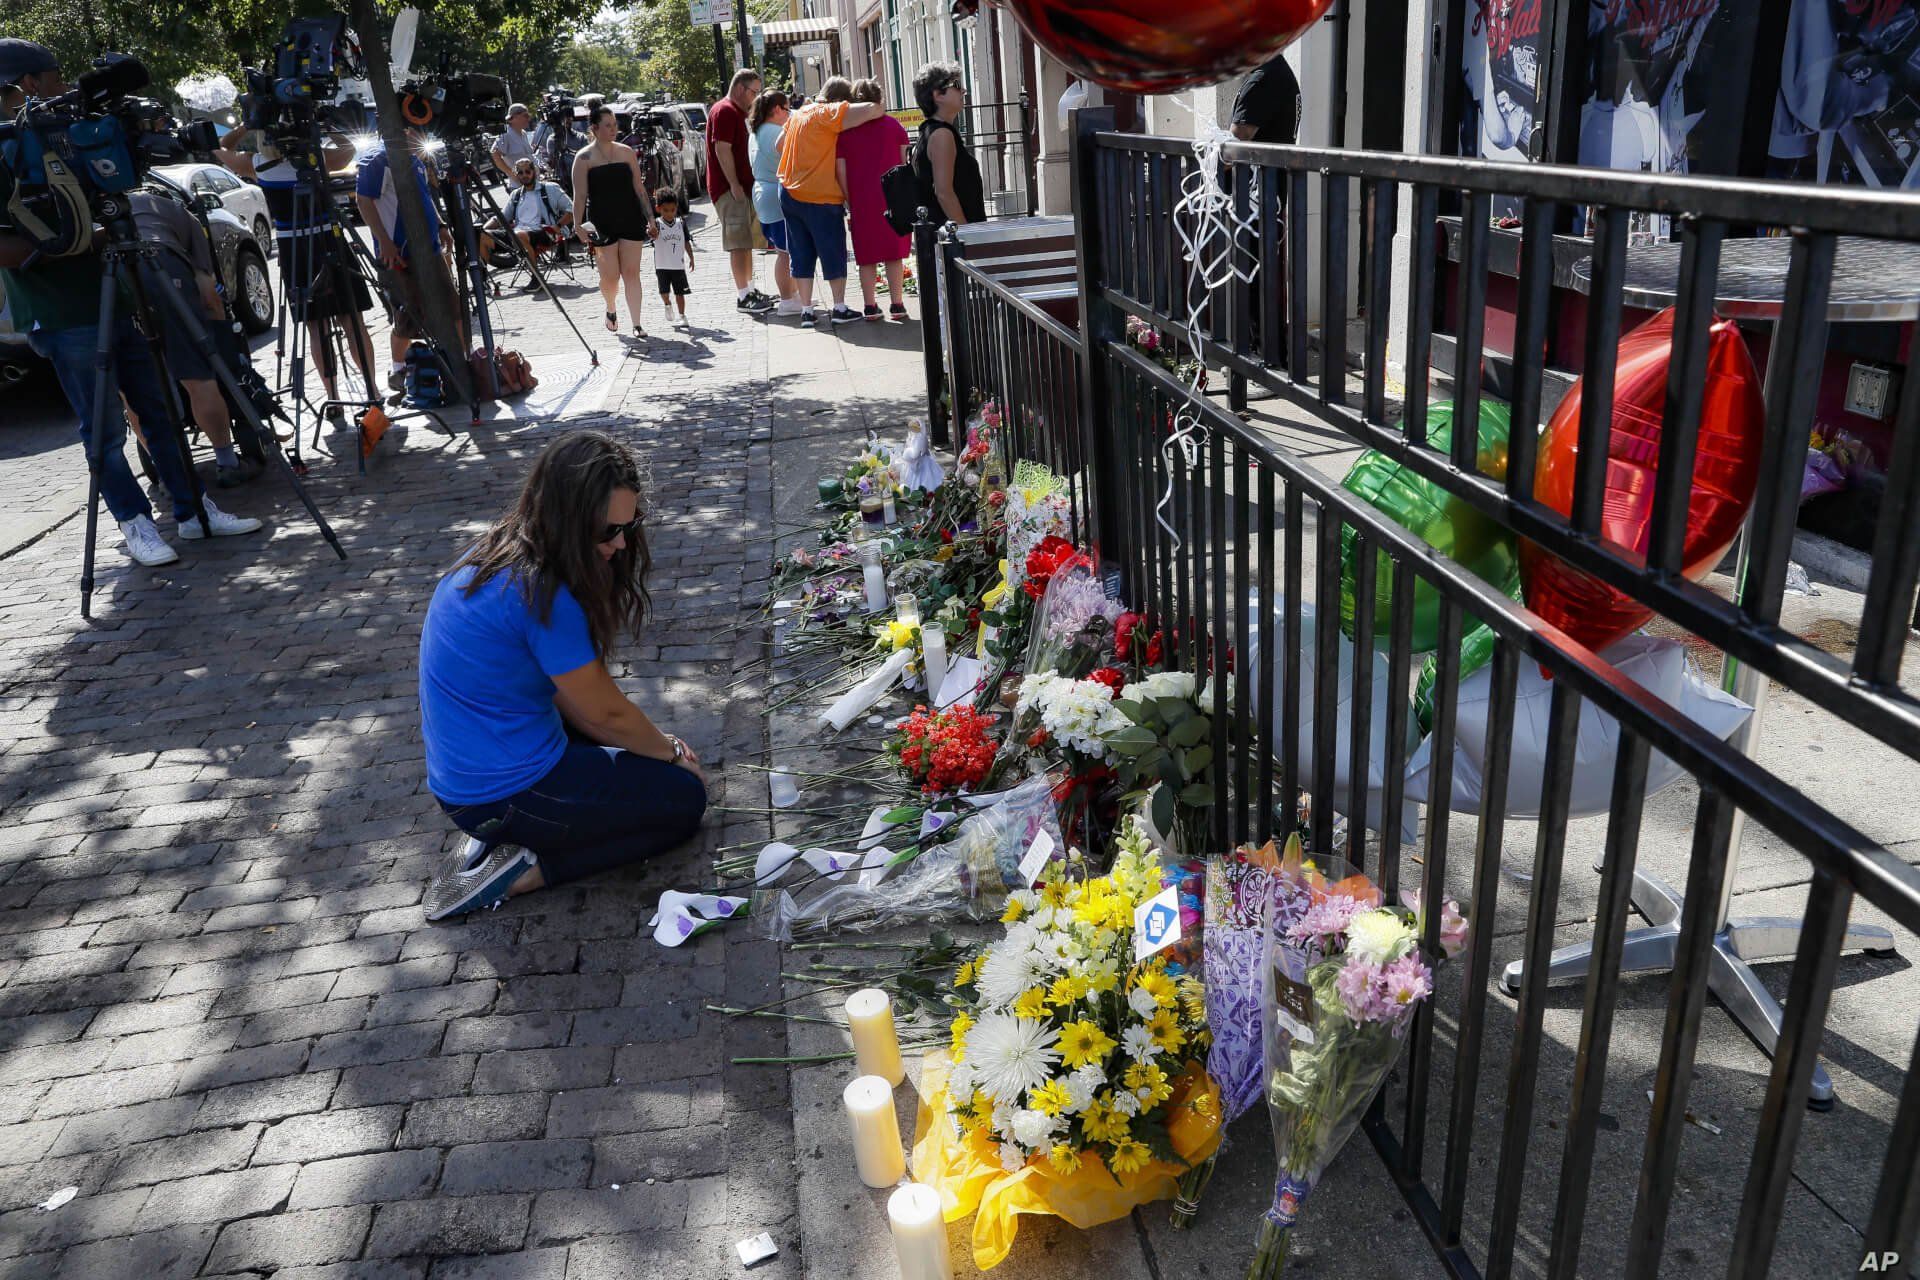 A mourner kneels at a makeshift memorial near members of the media outside the Hole in the Wall bar in the Oregon District in Dayton, Ohio, Aug. 5, 2019.